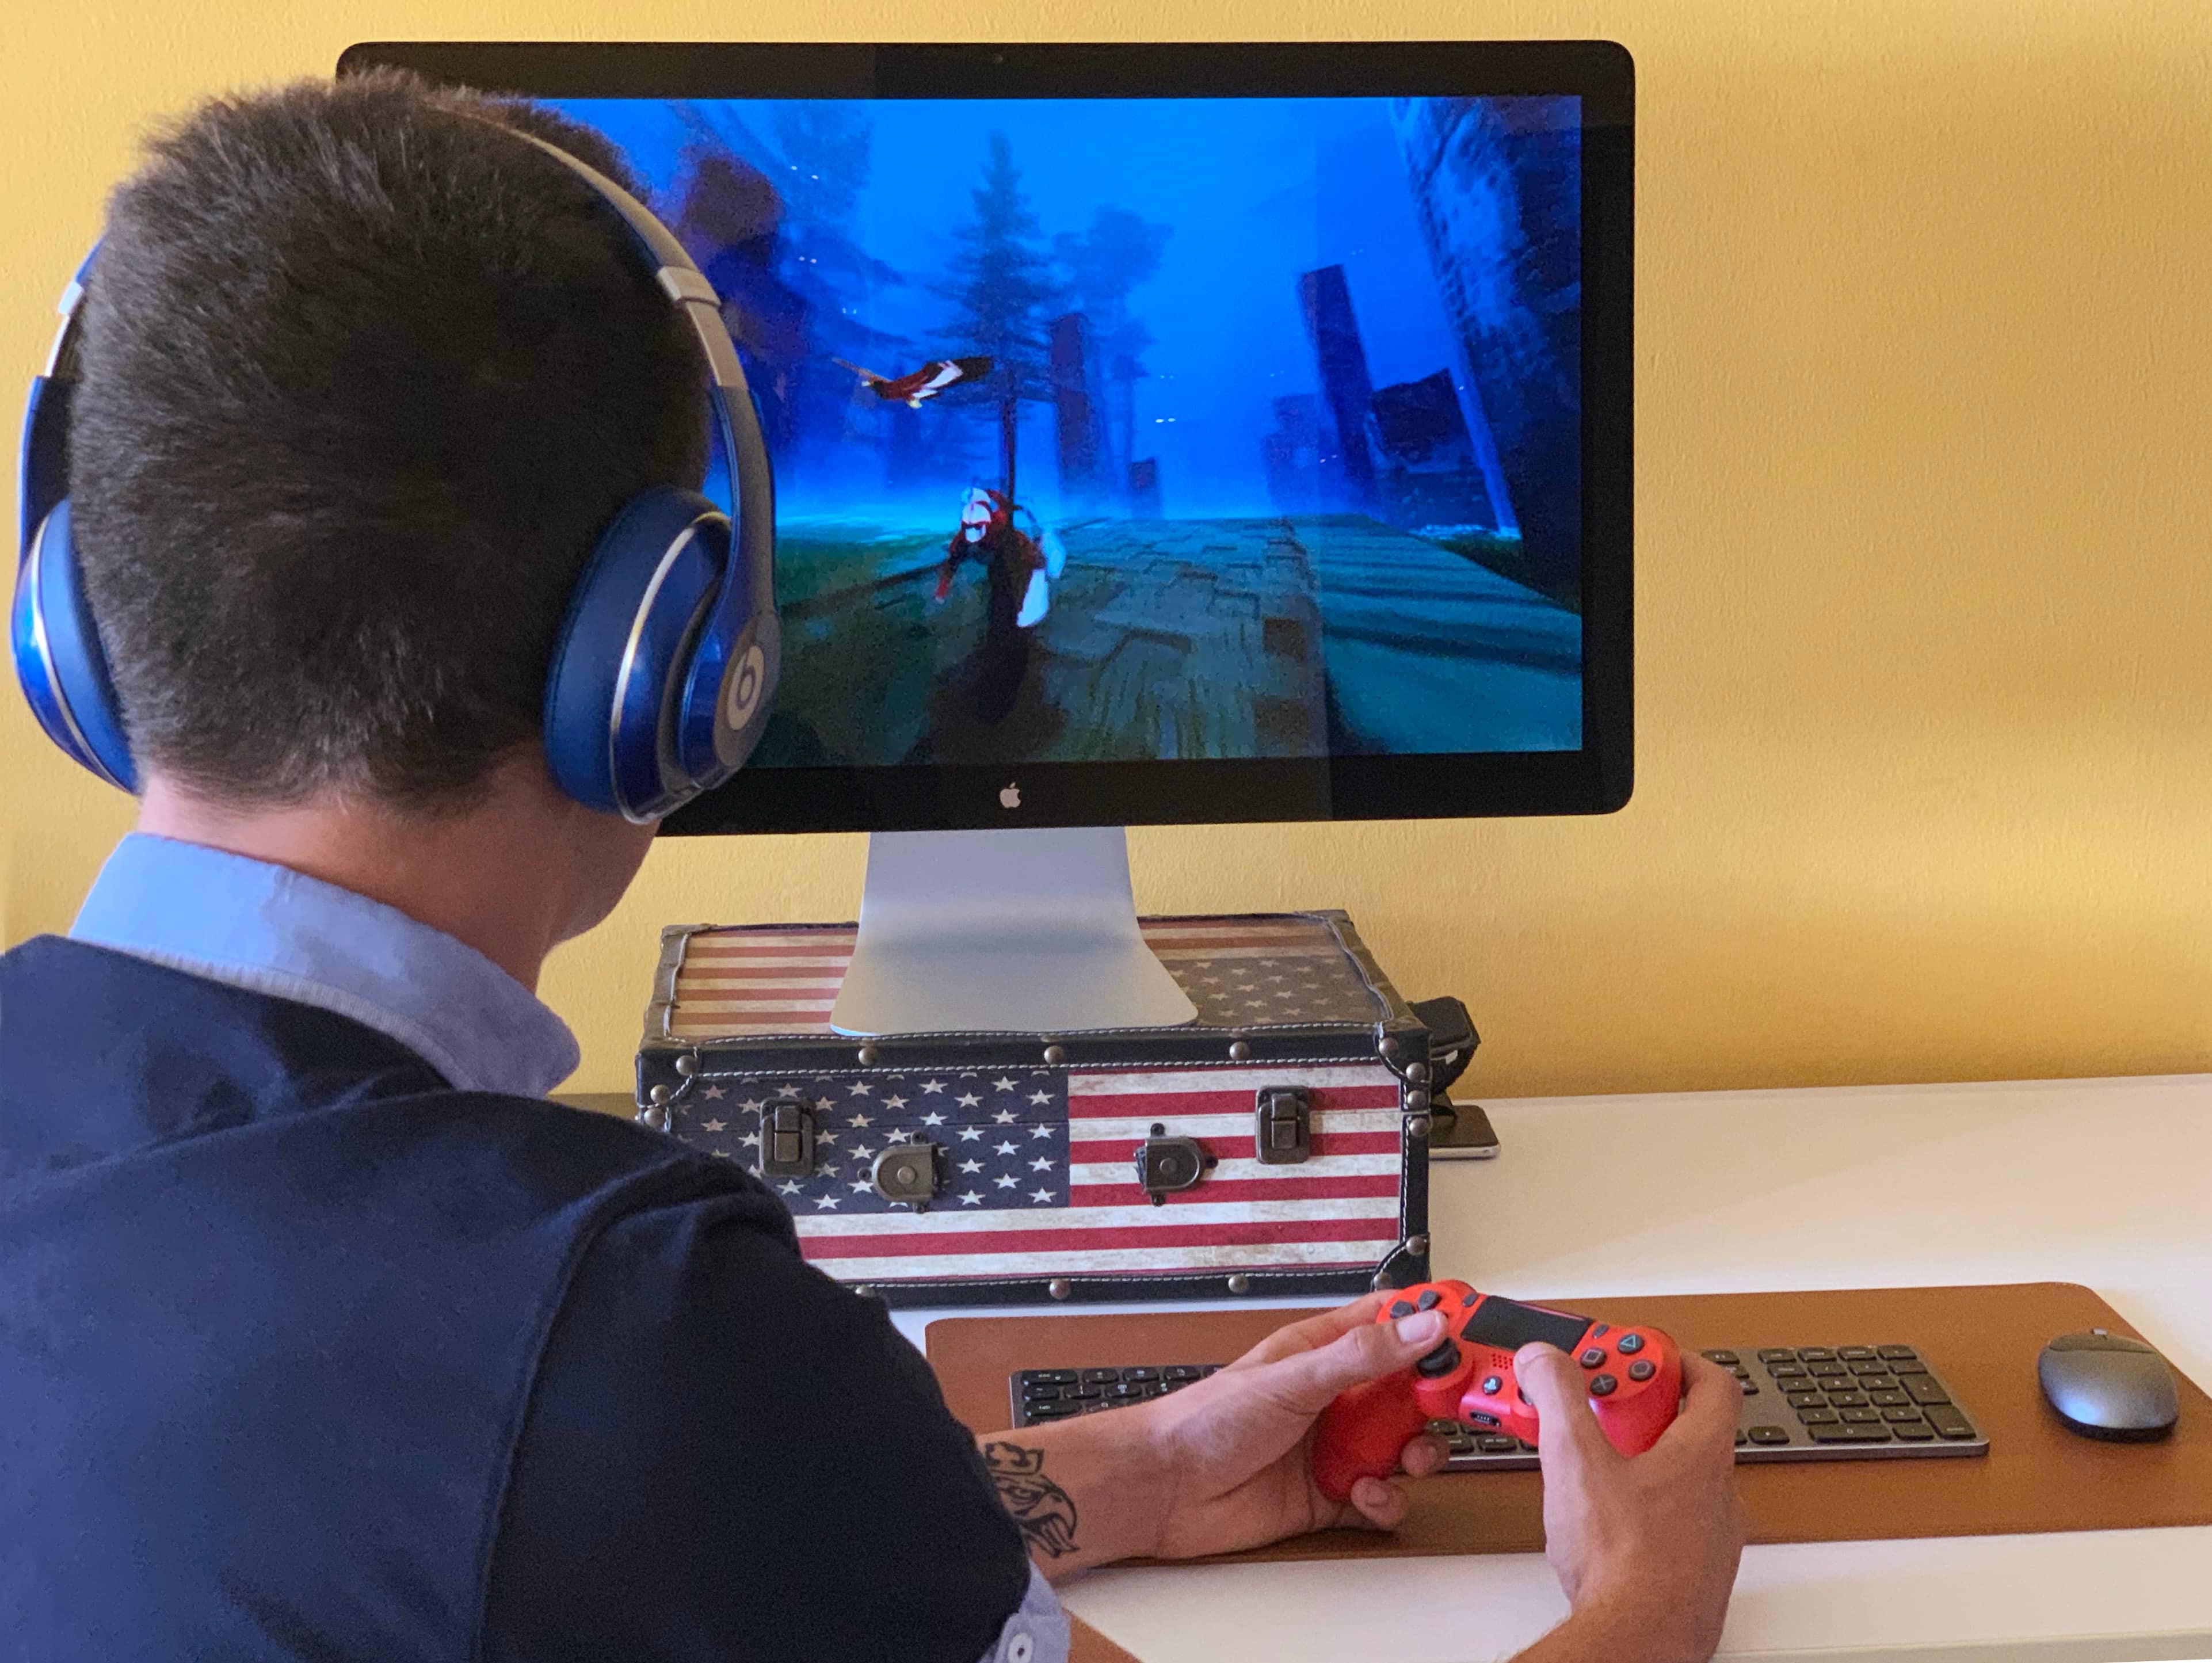 A photo showing a young male from the back who sits at a desk and holds a controller in his hands, playing a game on their Mac